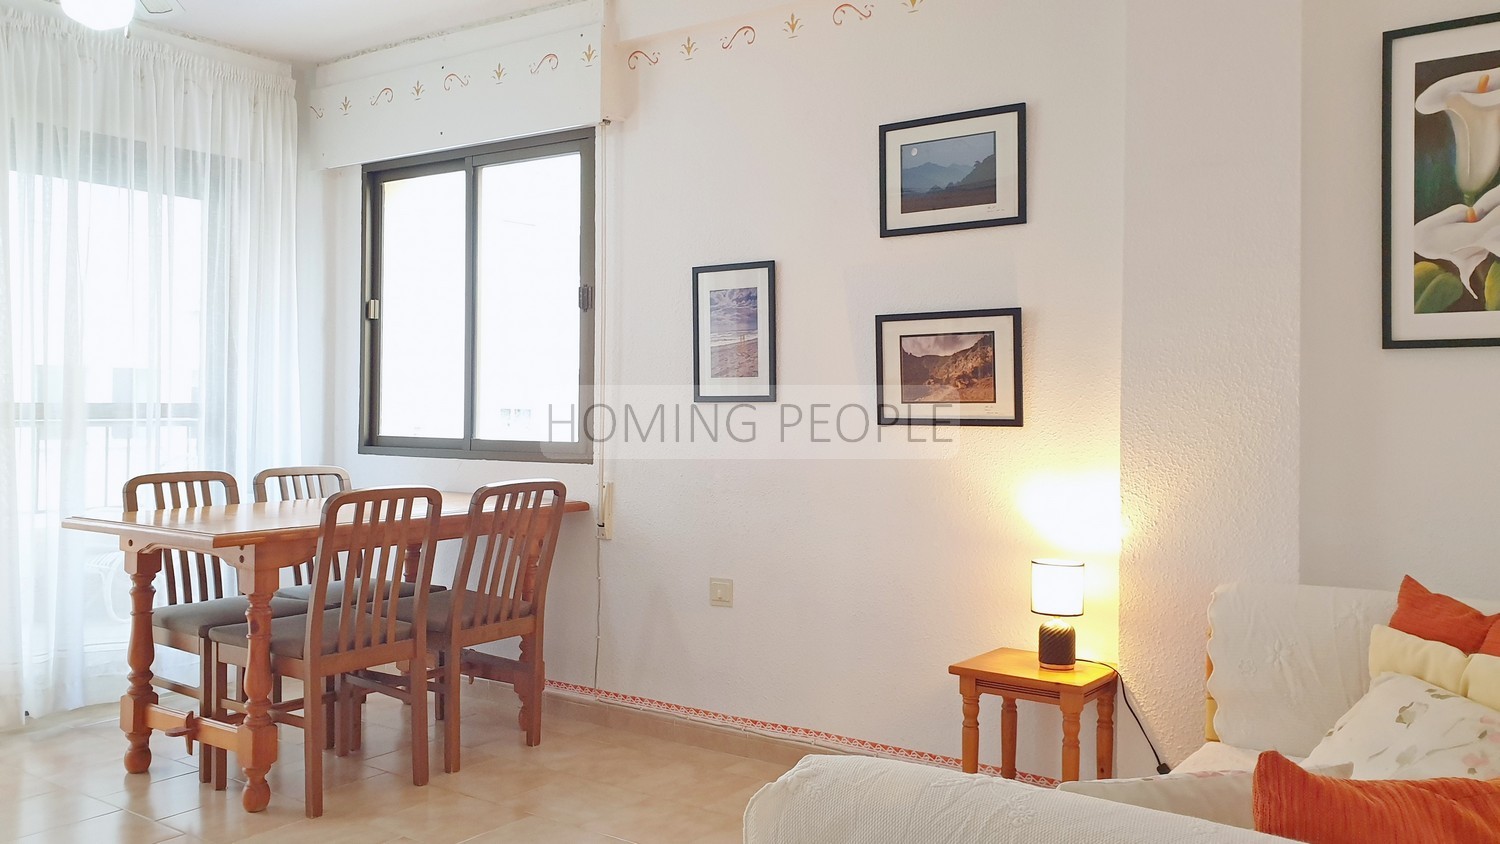 Bright apartment in seafront building with swimming pool and parking space